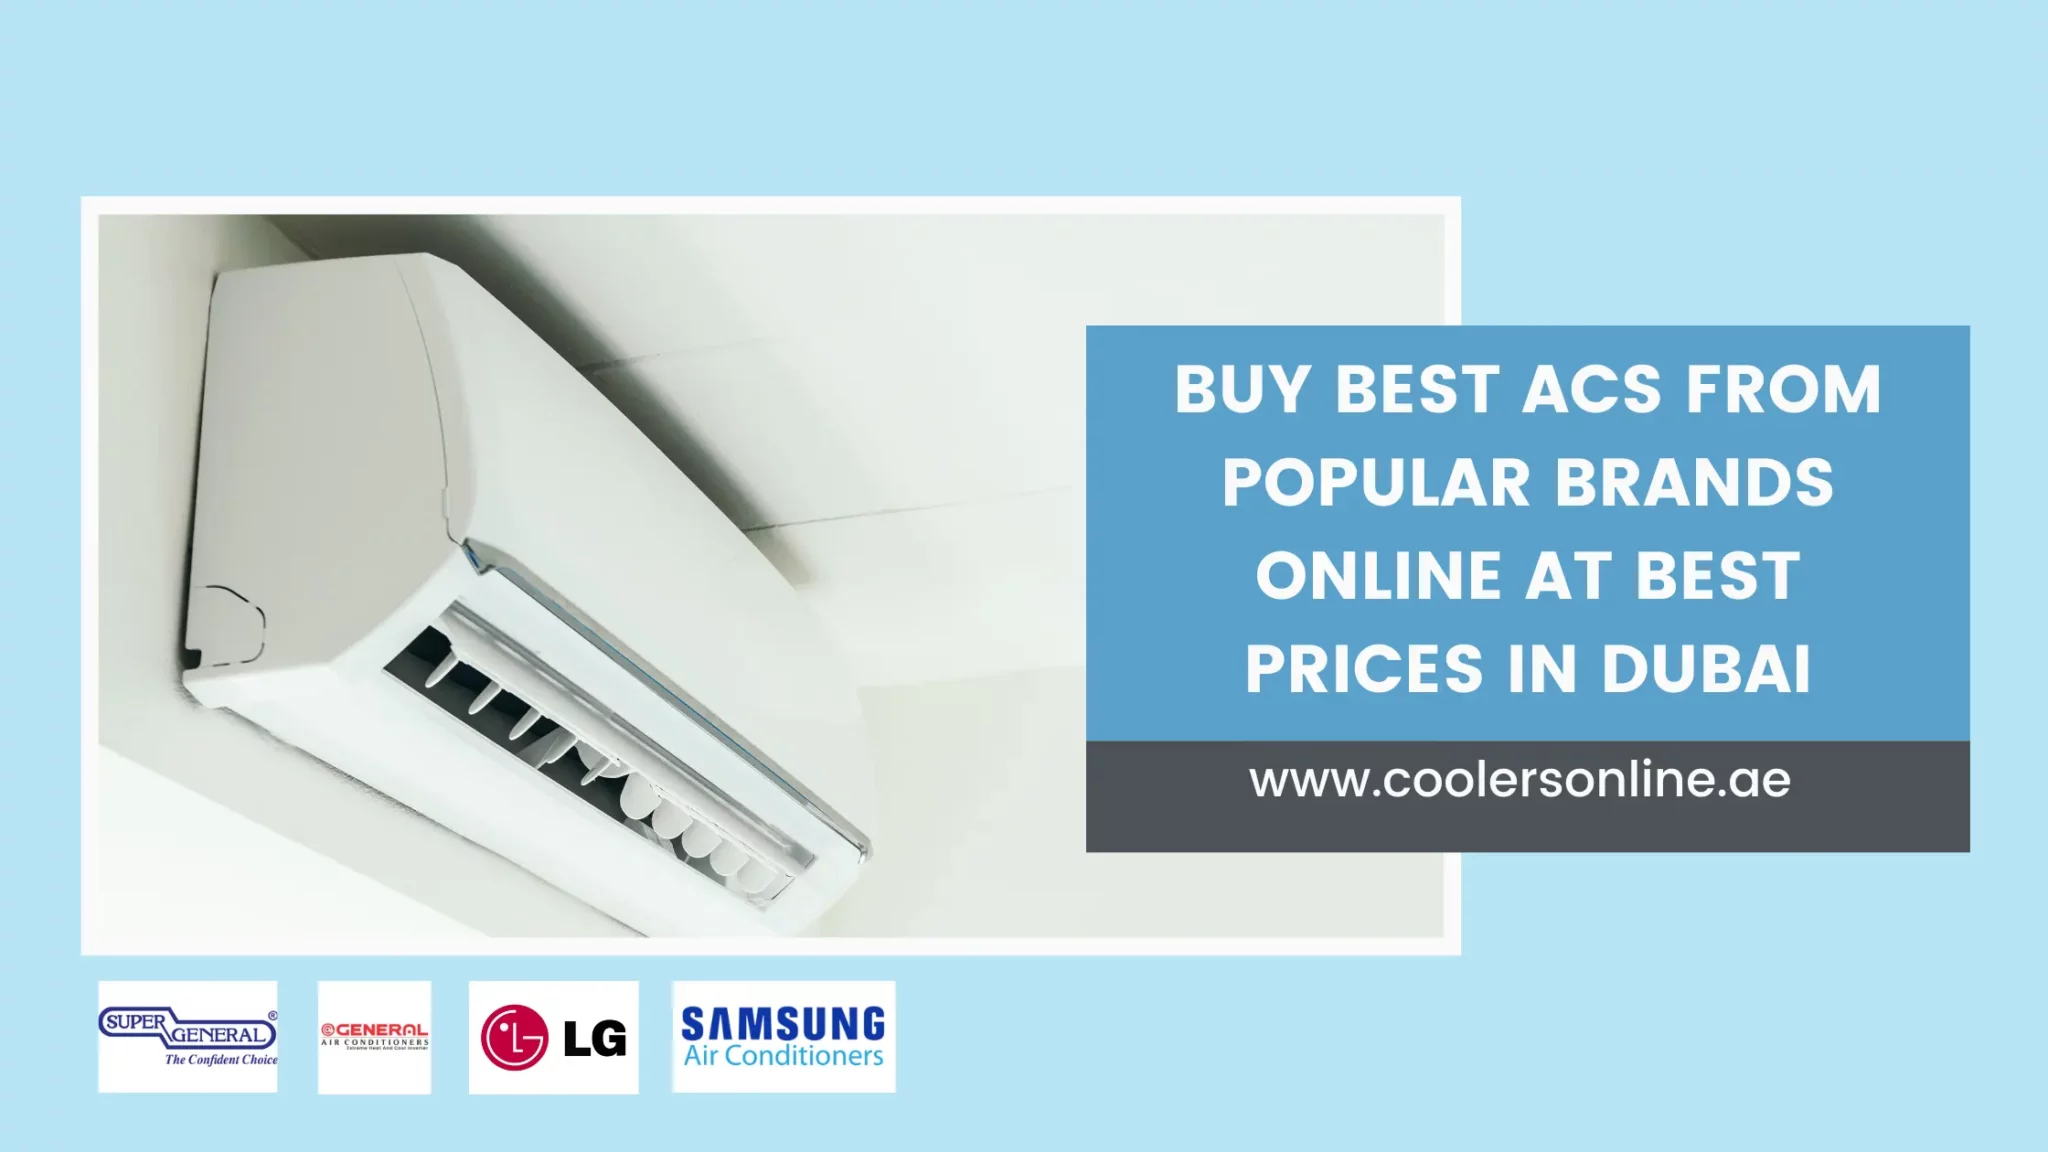 Buy Best ACs from Popular Brands Online at Best Prices in Dubai